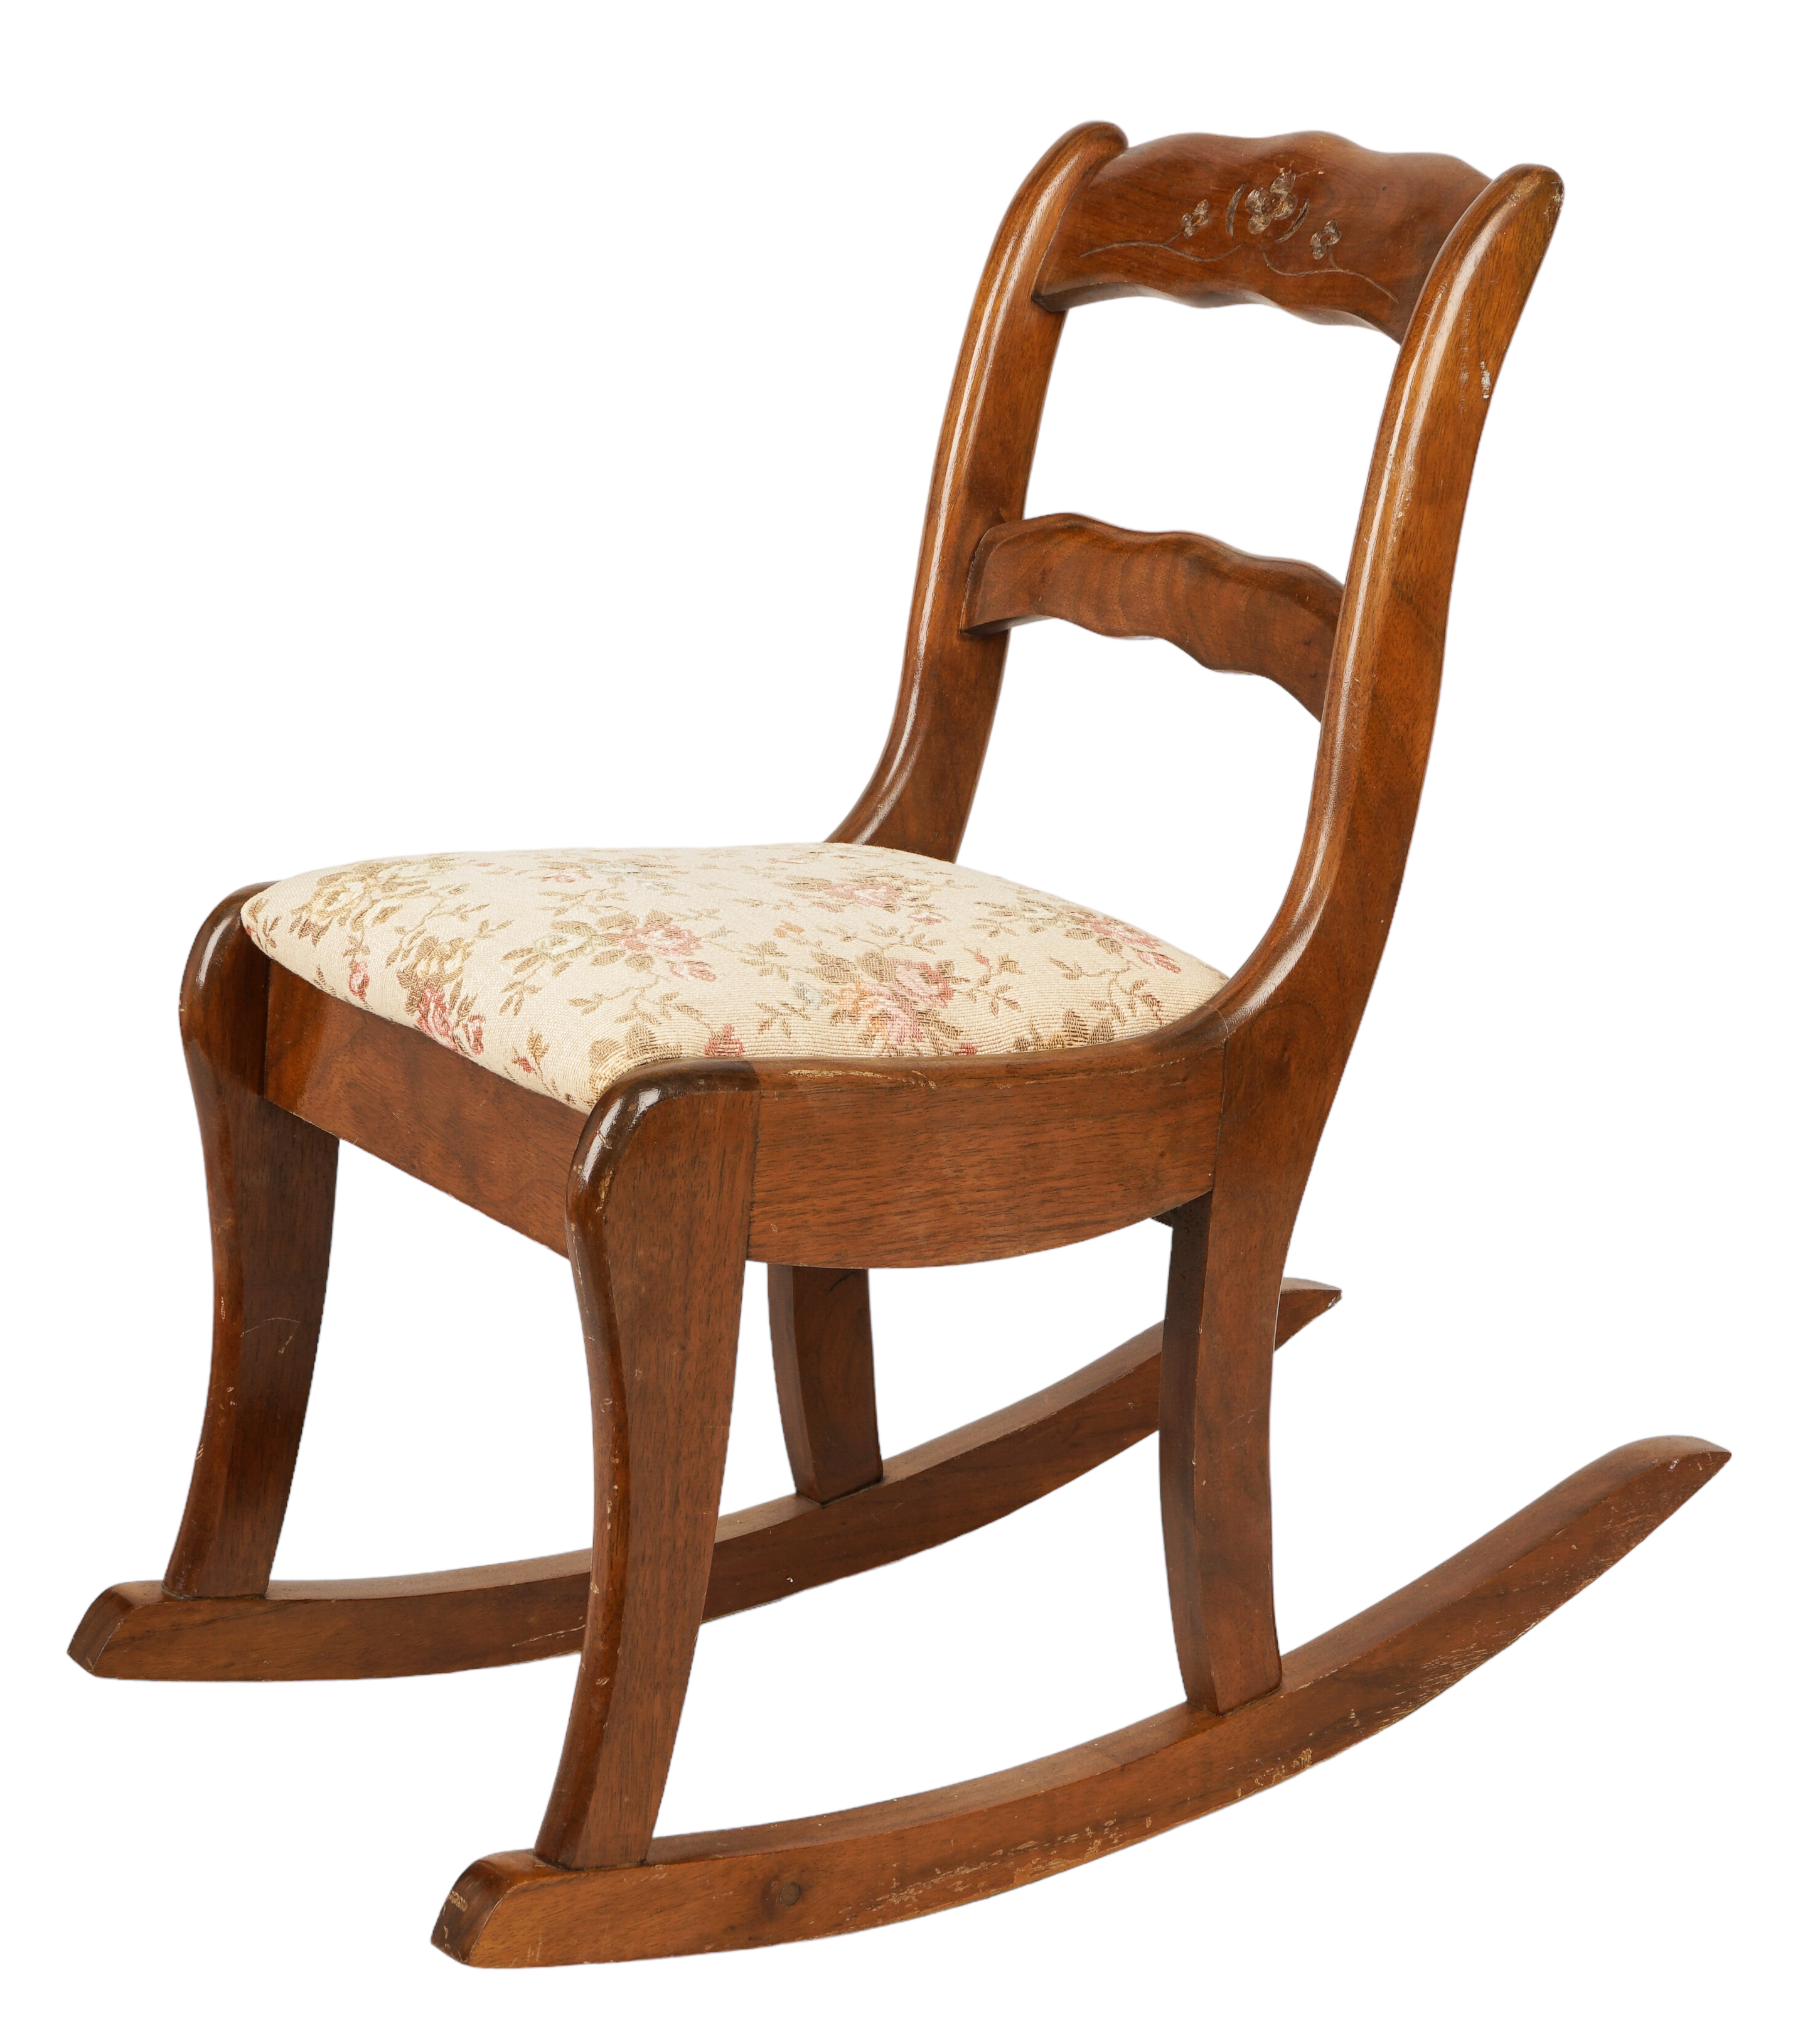 Child's wood rocking chair, carved